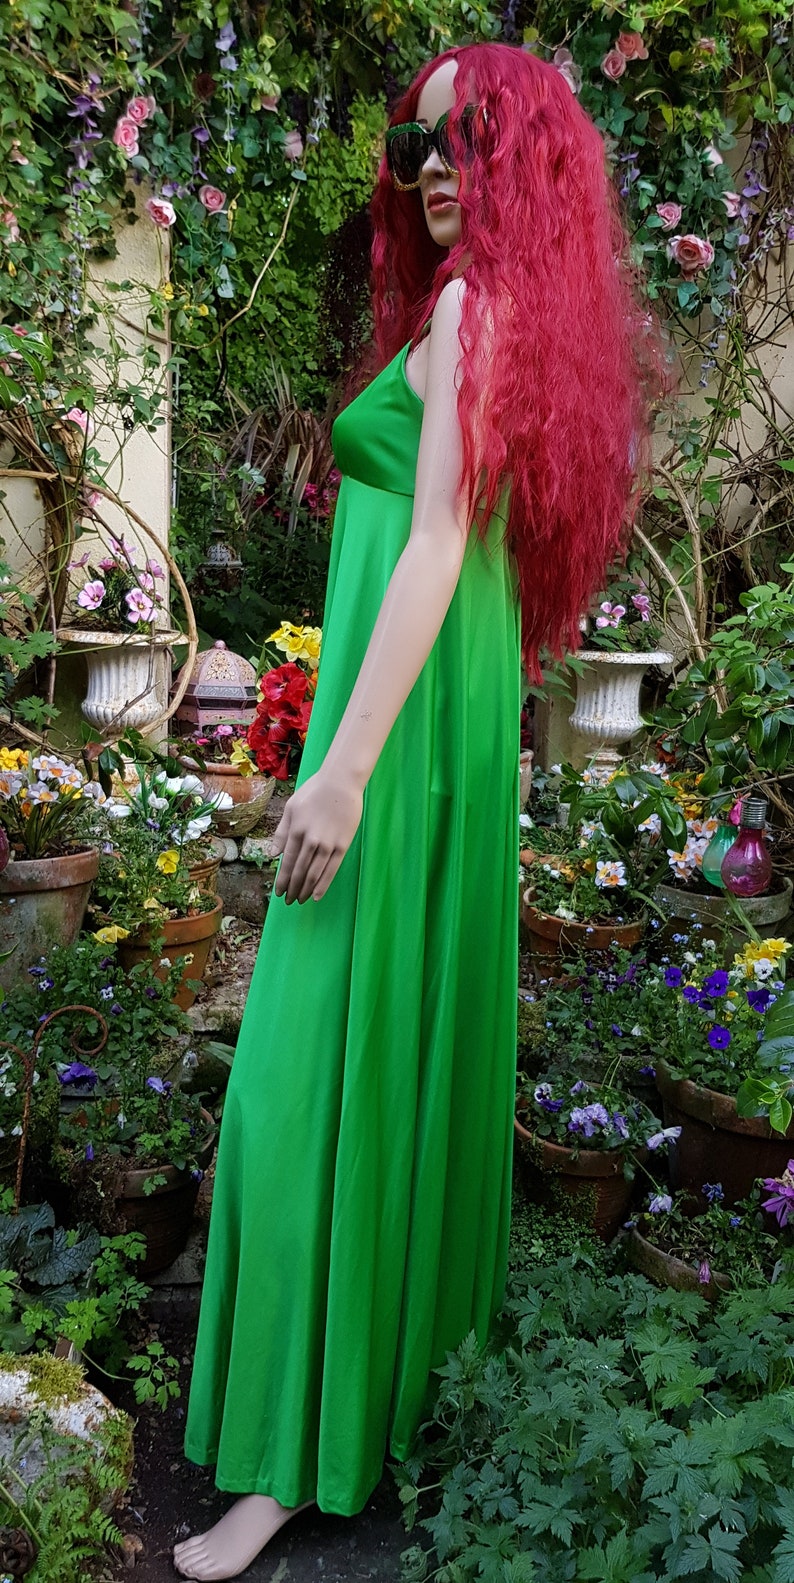 UK 6/8 US 2/4 Fantastic Vintage 1970s Bright Green Slinky Strappy Empire Line Maxi Sun Dress by QUAD image 9